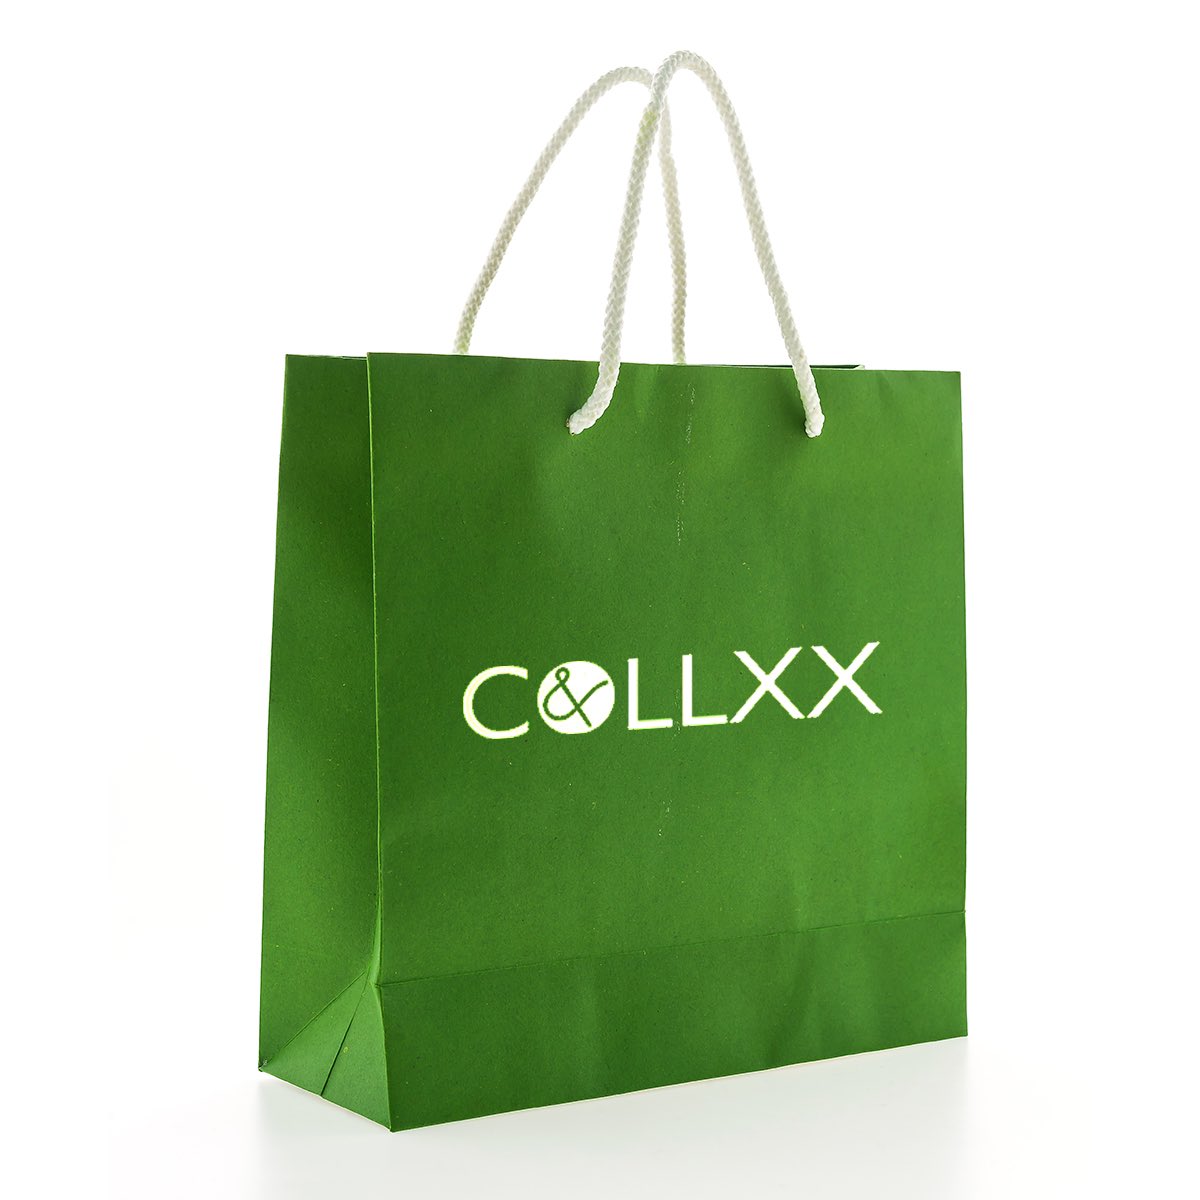 It’s weekend and it’s shopping o’clock 😊

You don’t need to visit a physical store when you can get all you need on Collxx. 

Visit collxx.com to get started. 

•

#collxx #onlinestore #bagstore #artstore #clothesstore #fridayshopping #awoof #luxurywears